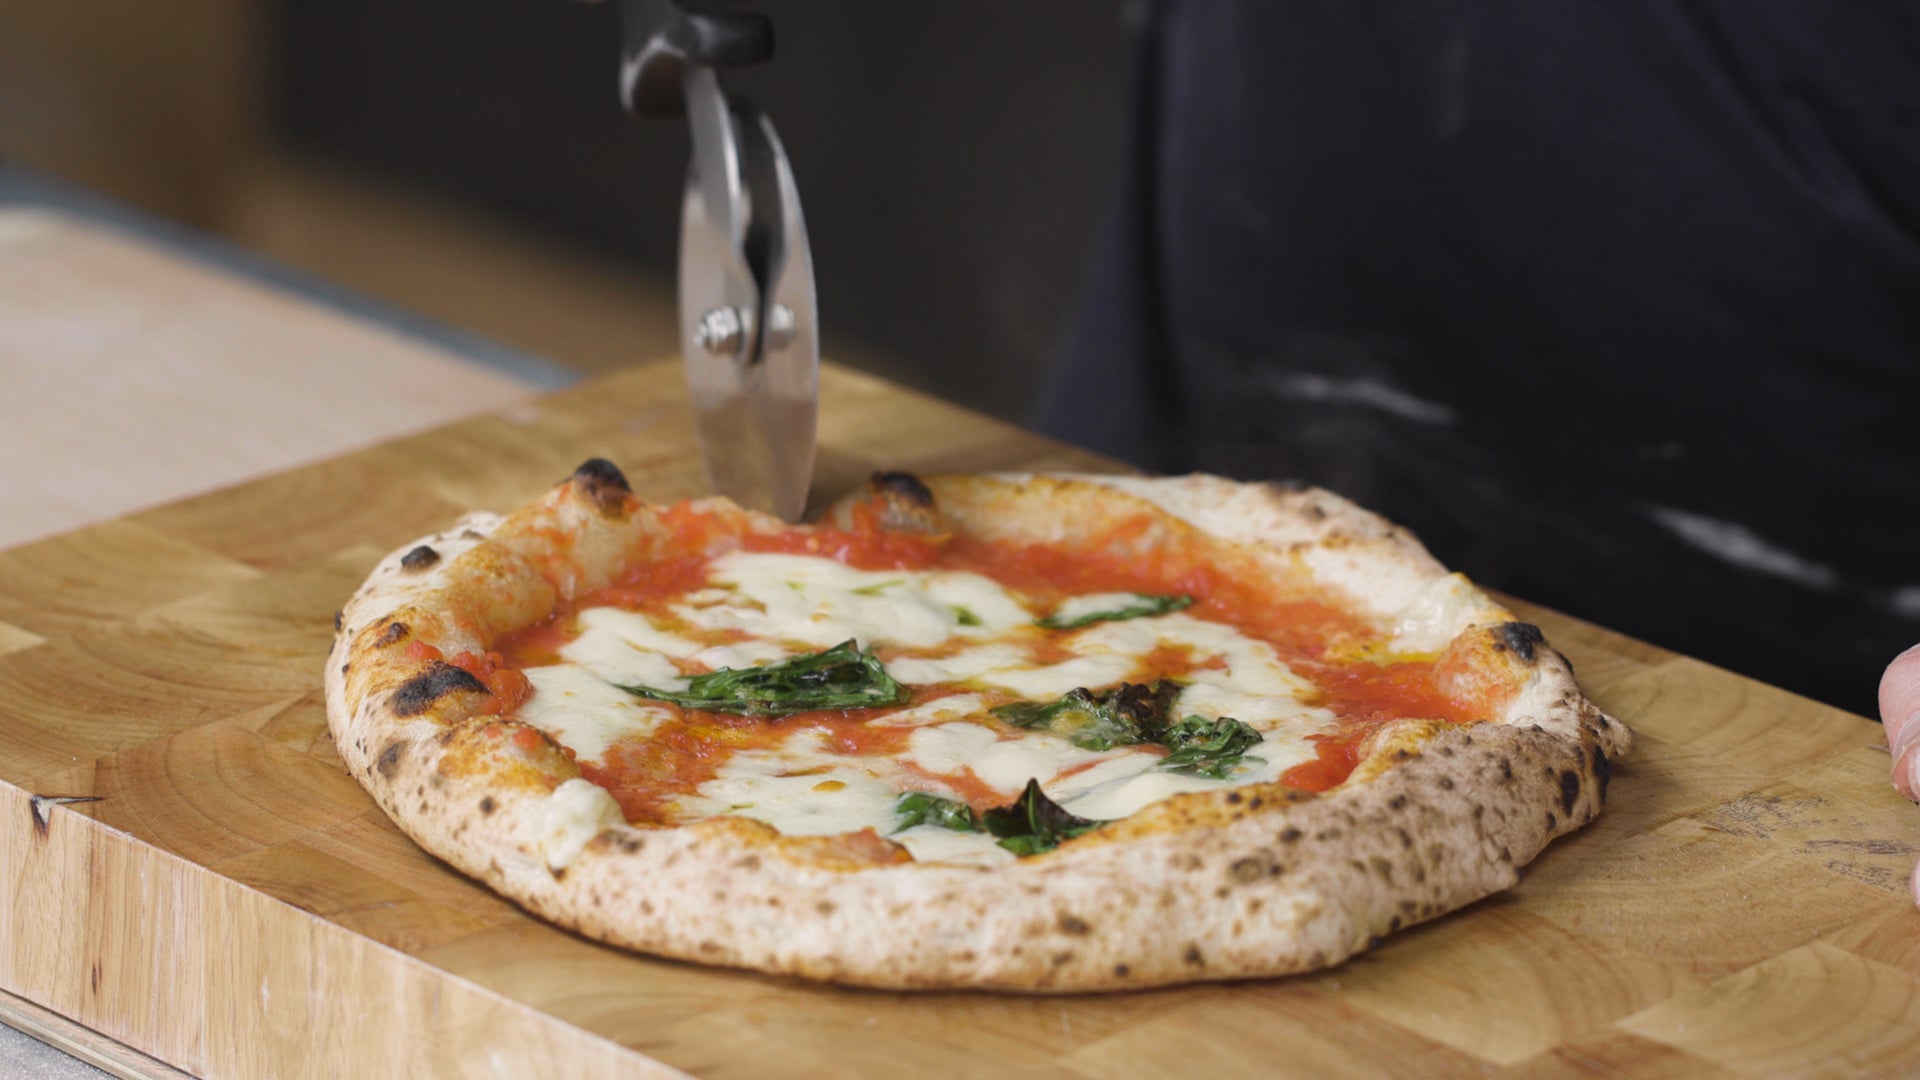 How to make pizza at home: Experts weigh in on pizza makers and